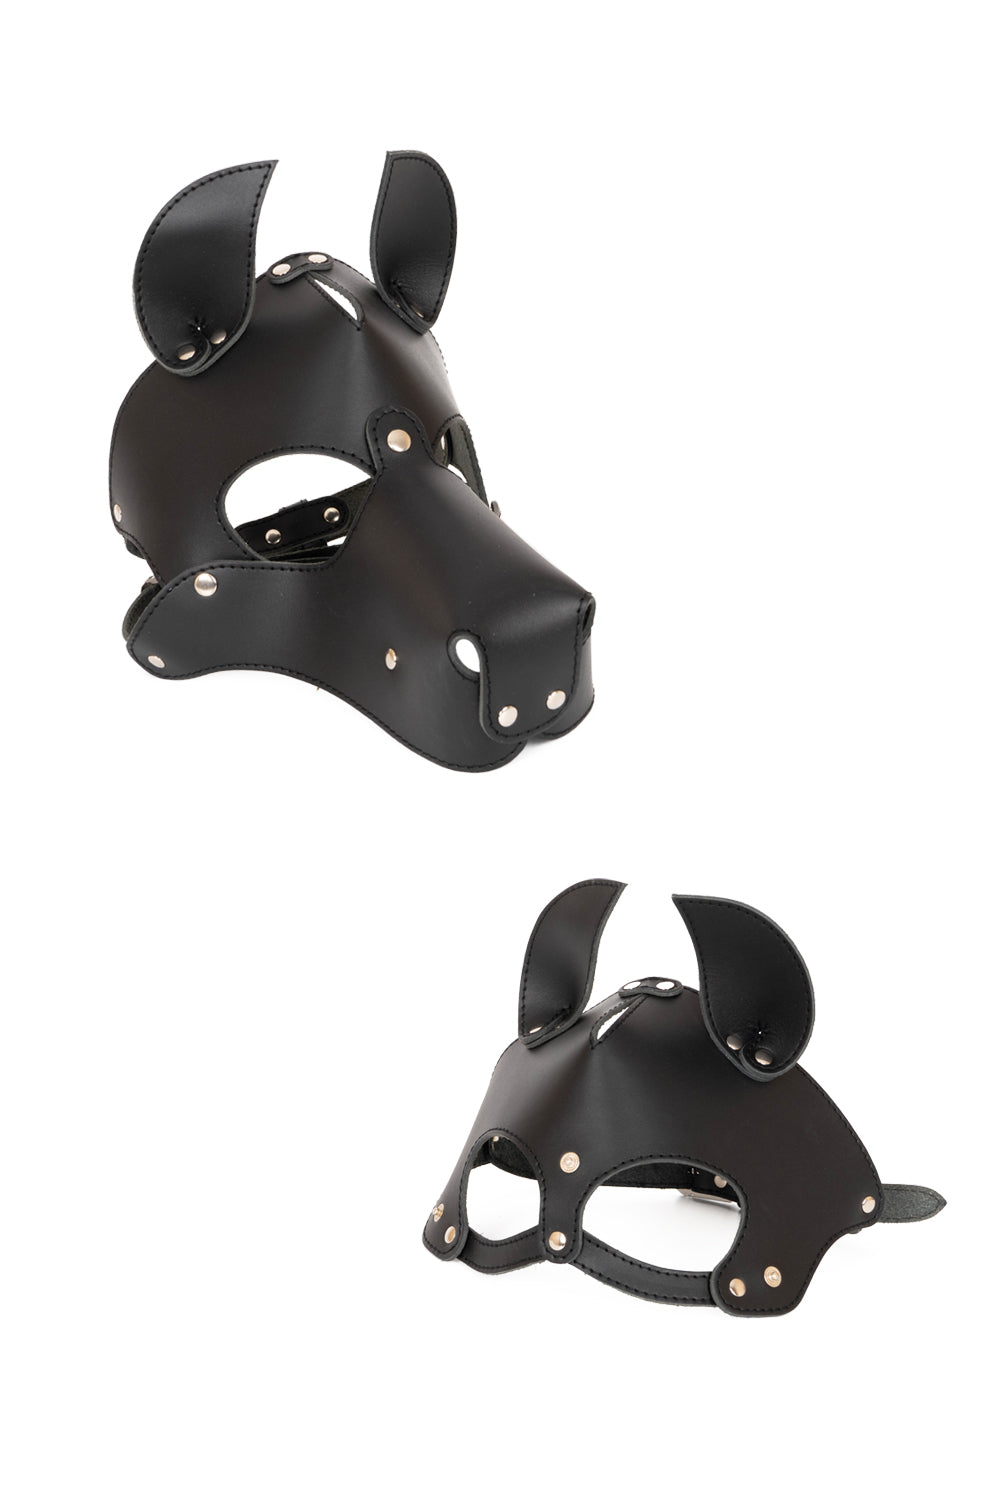 Dog mask with detachable muzzle. Green